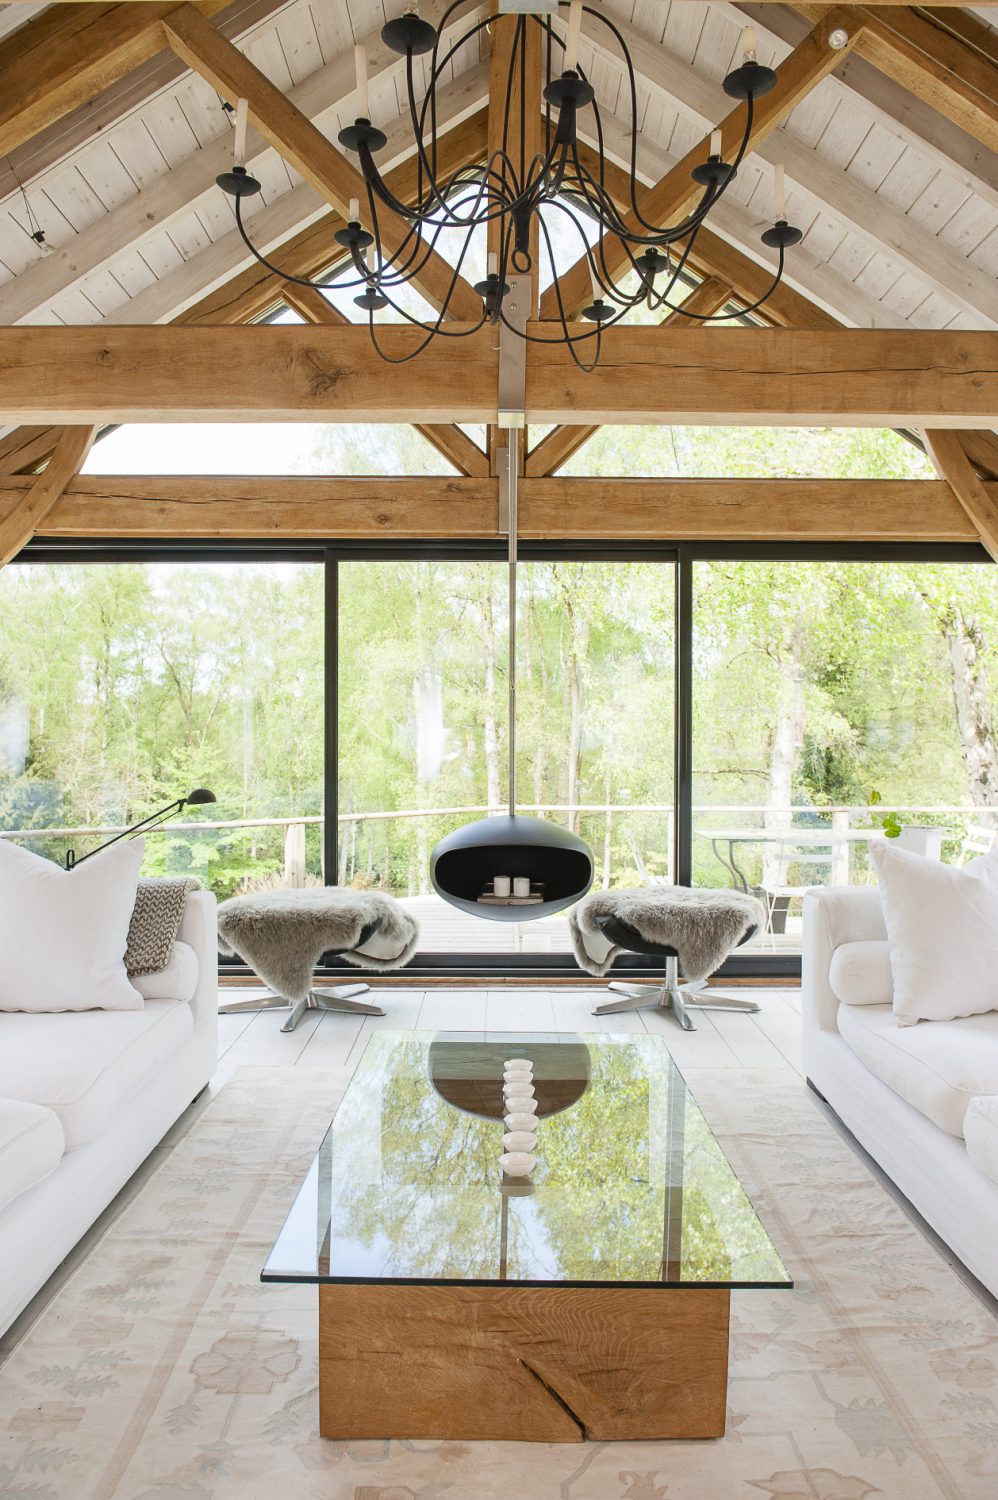 The most dramatic area of the downstairs living area is without doubt the vaulted glass and oak sitting room